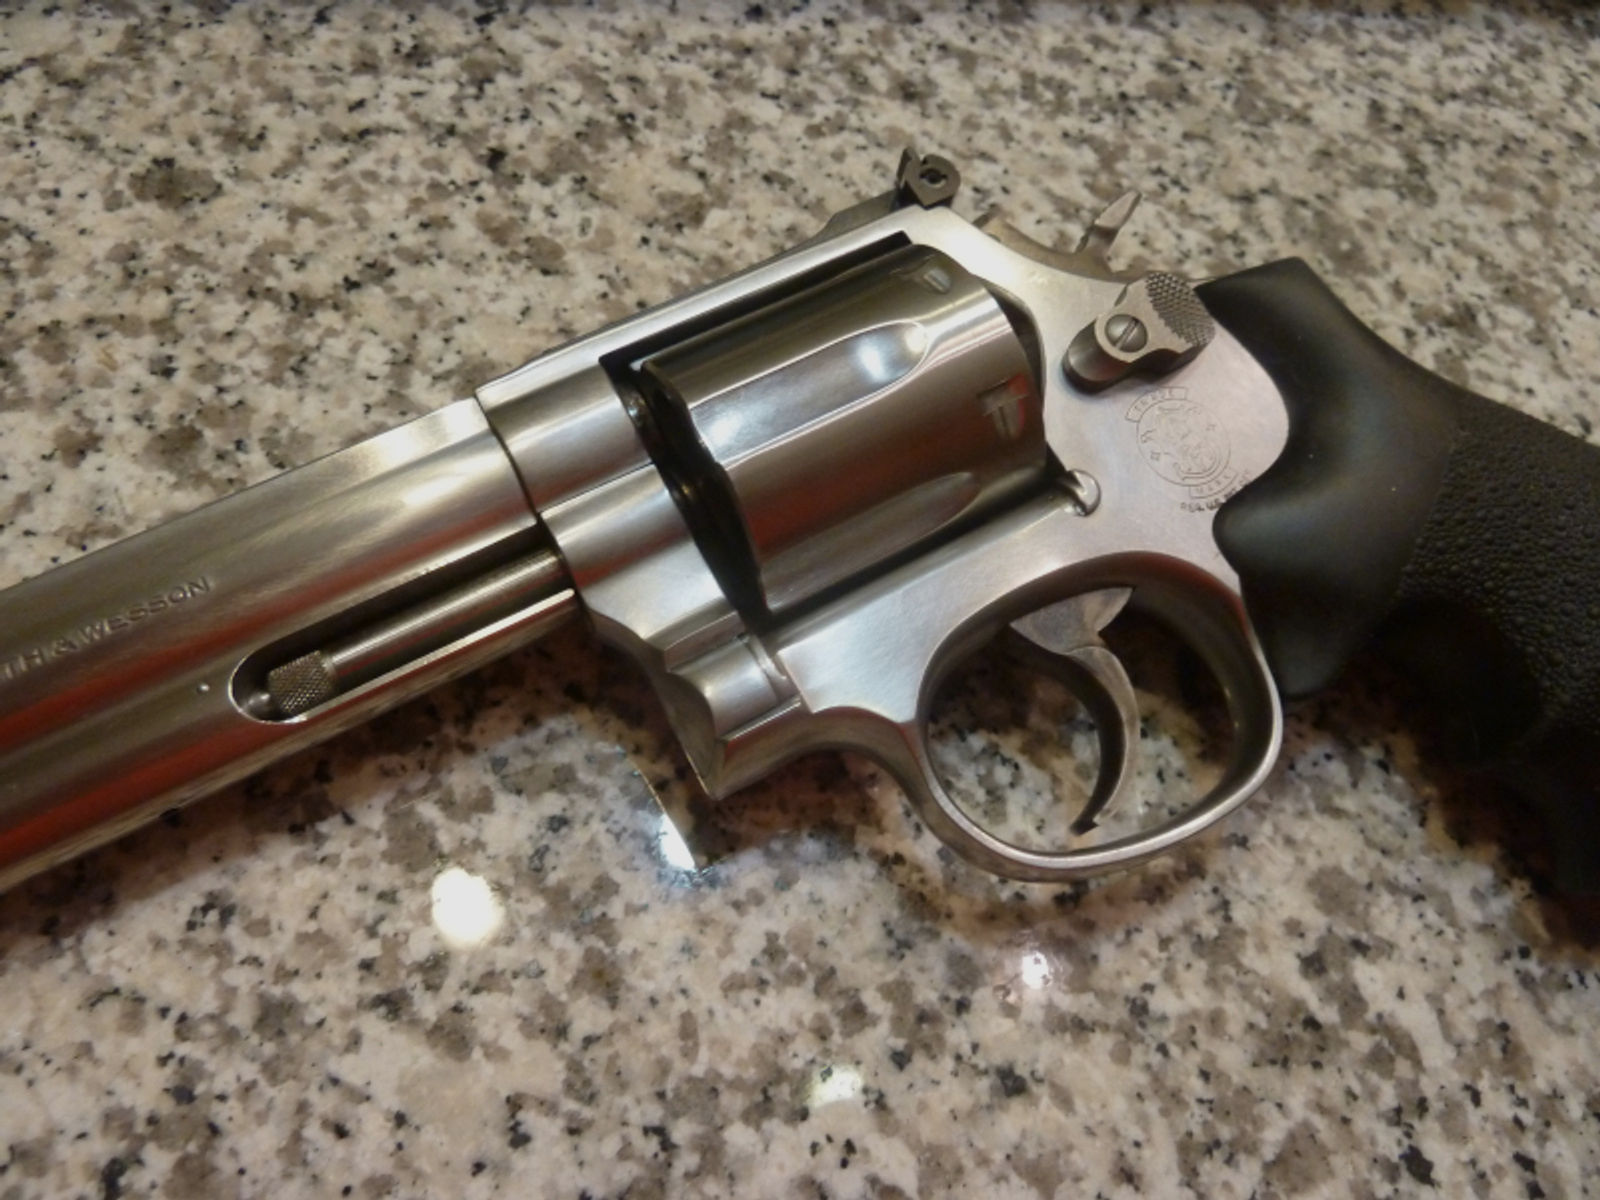 Smith&Wesson 686-4, Revolver .357Mag, stainless, Hogue-Griff